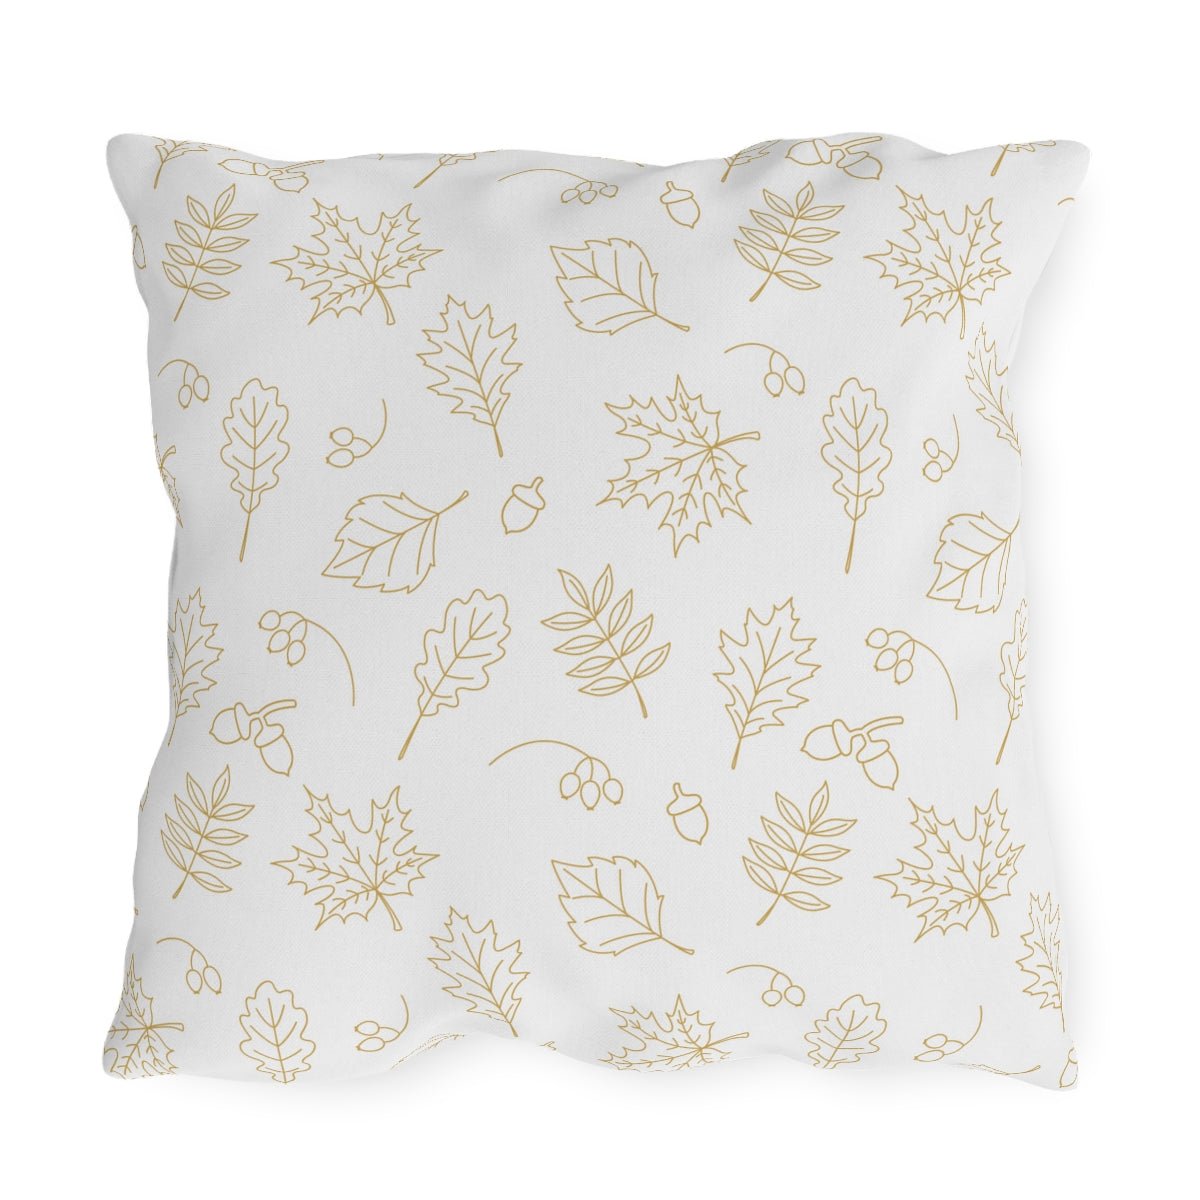 Acorns and Leaves Outdoor Pillow - Puffin Lime